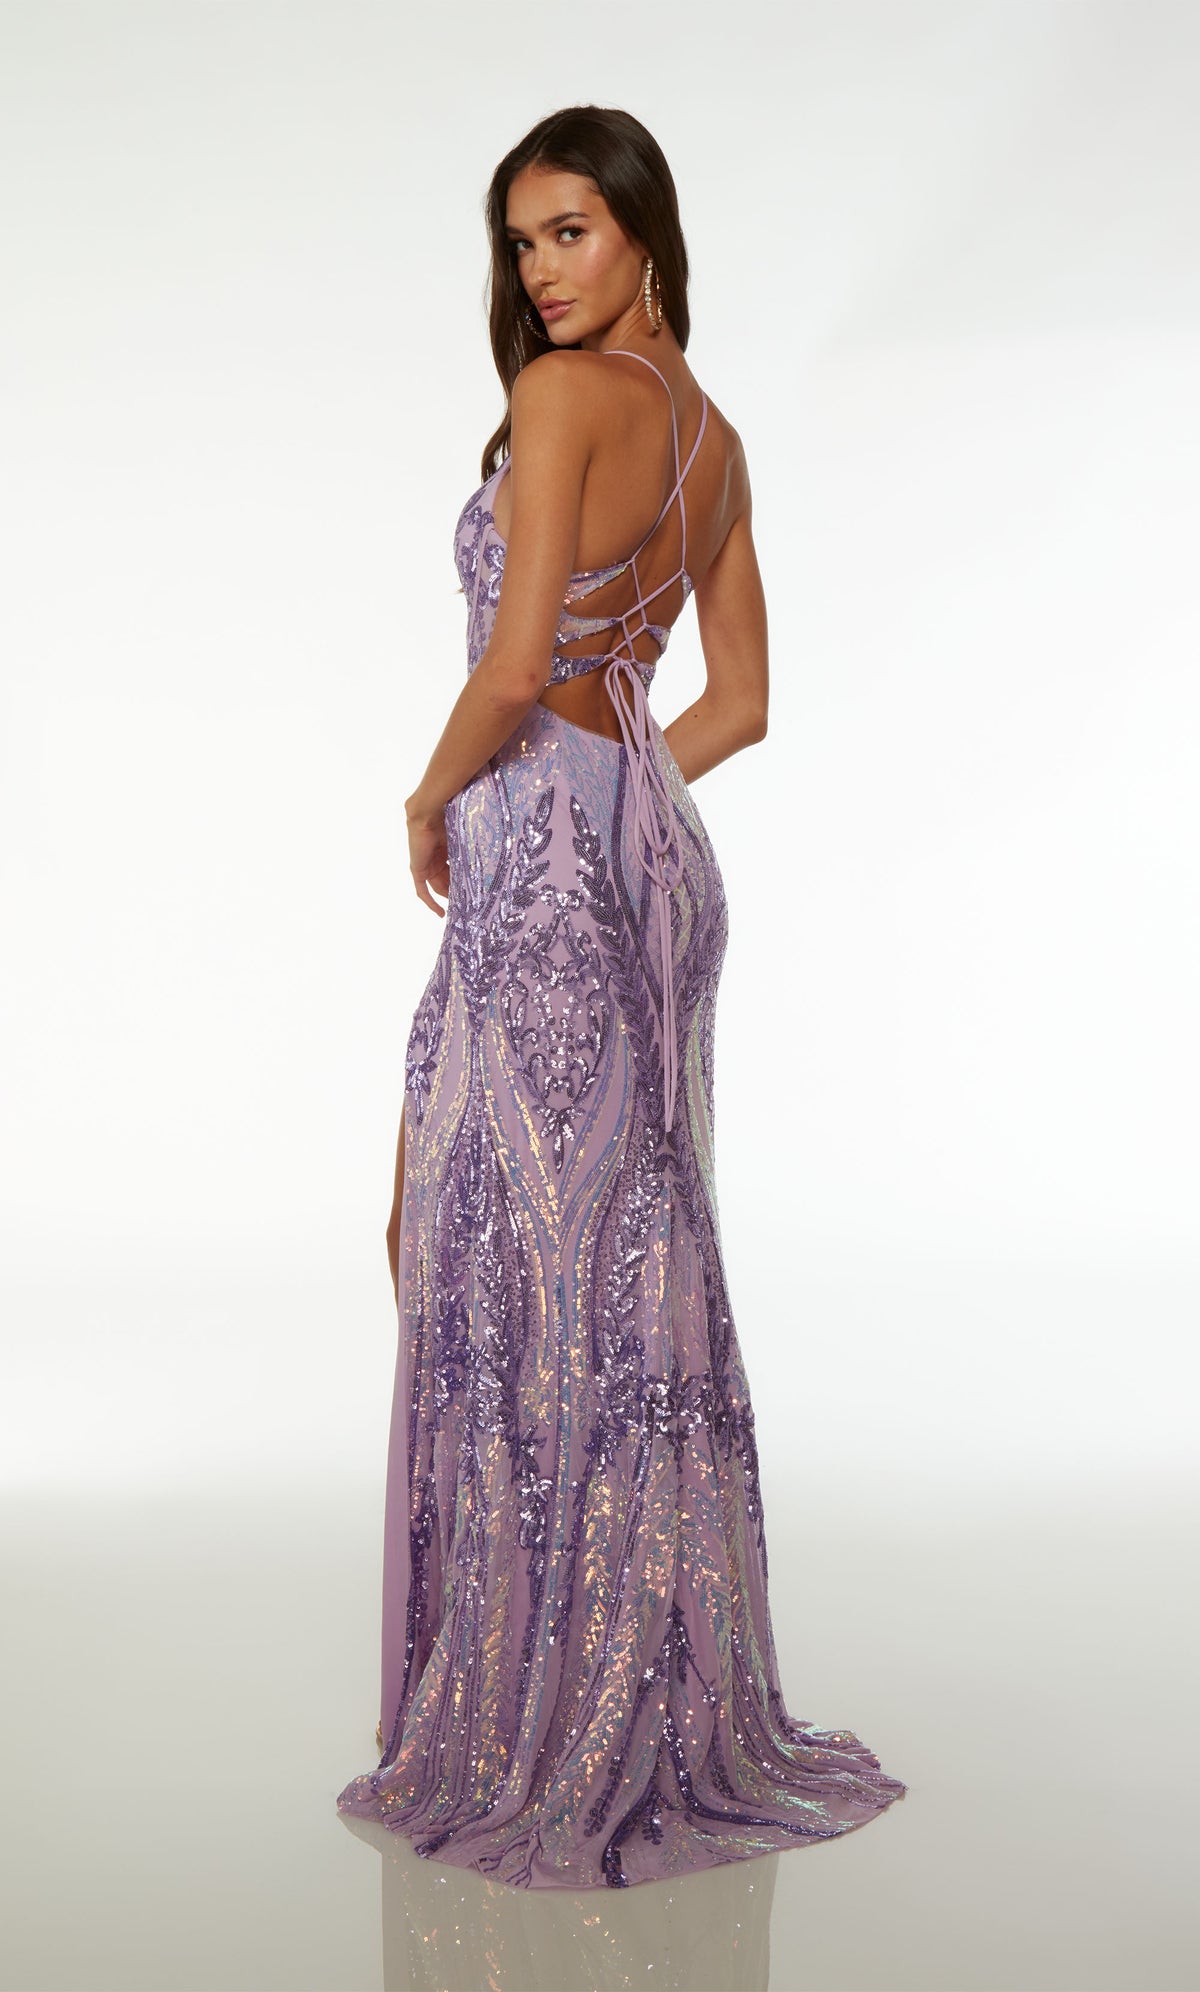 Lilac purple dress with plunging neckline, side slit, crisscross lace-up back, train, and paisley-patterned iridescent sequin design for allure.